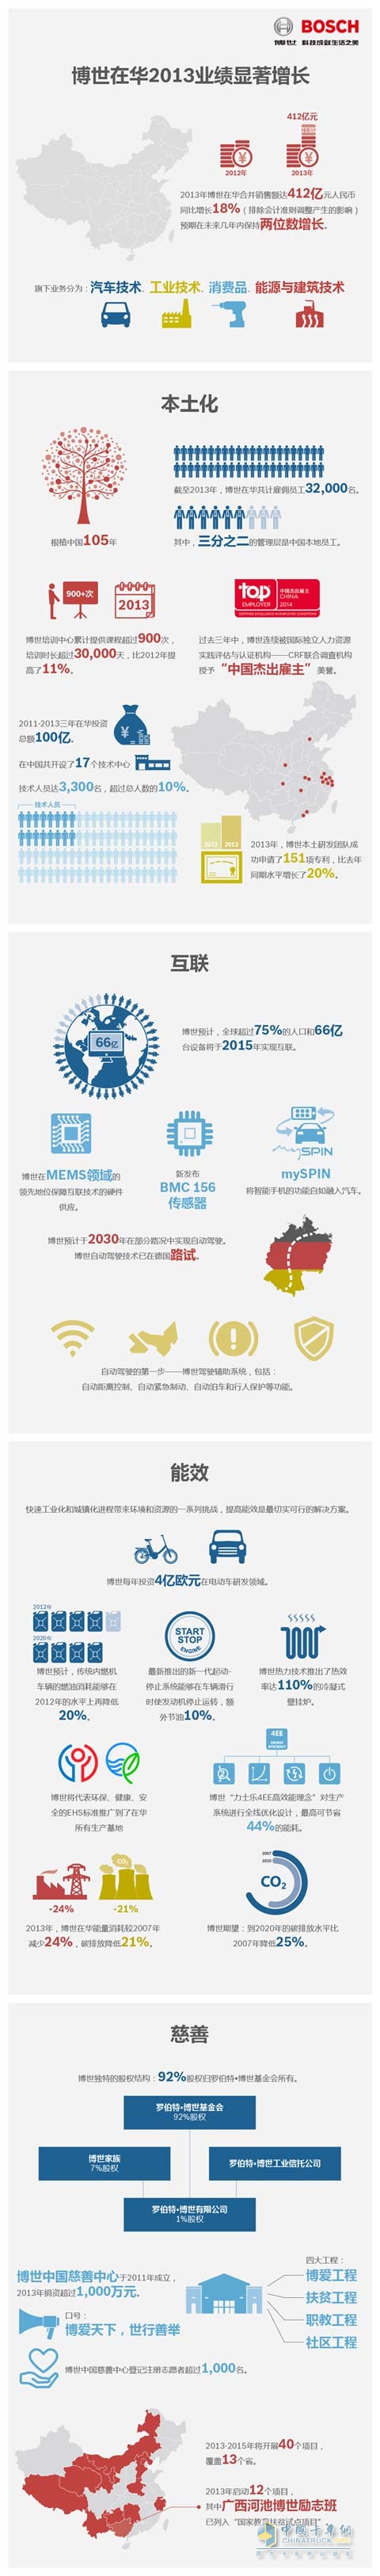 Bosch's 2013 performance in China is significant